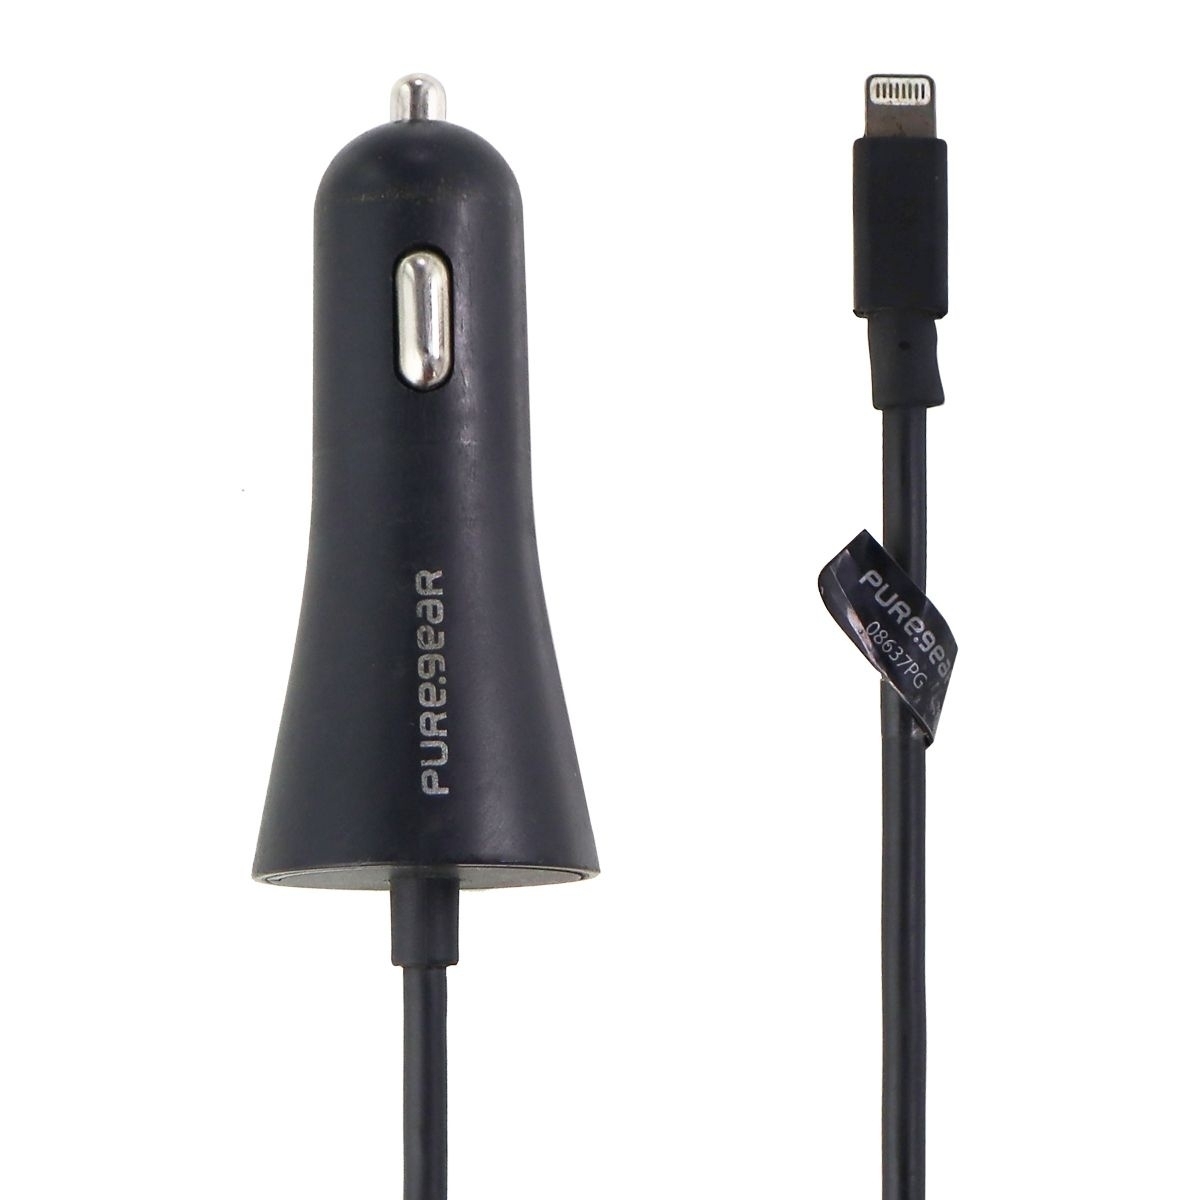 PureGear (12W/2.4A) (MFI) Car Charger For Apple Devices - Black (62804PG)